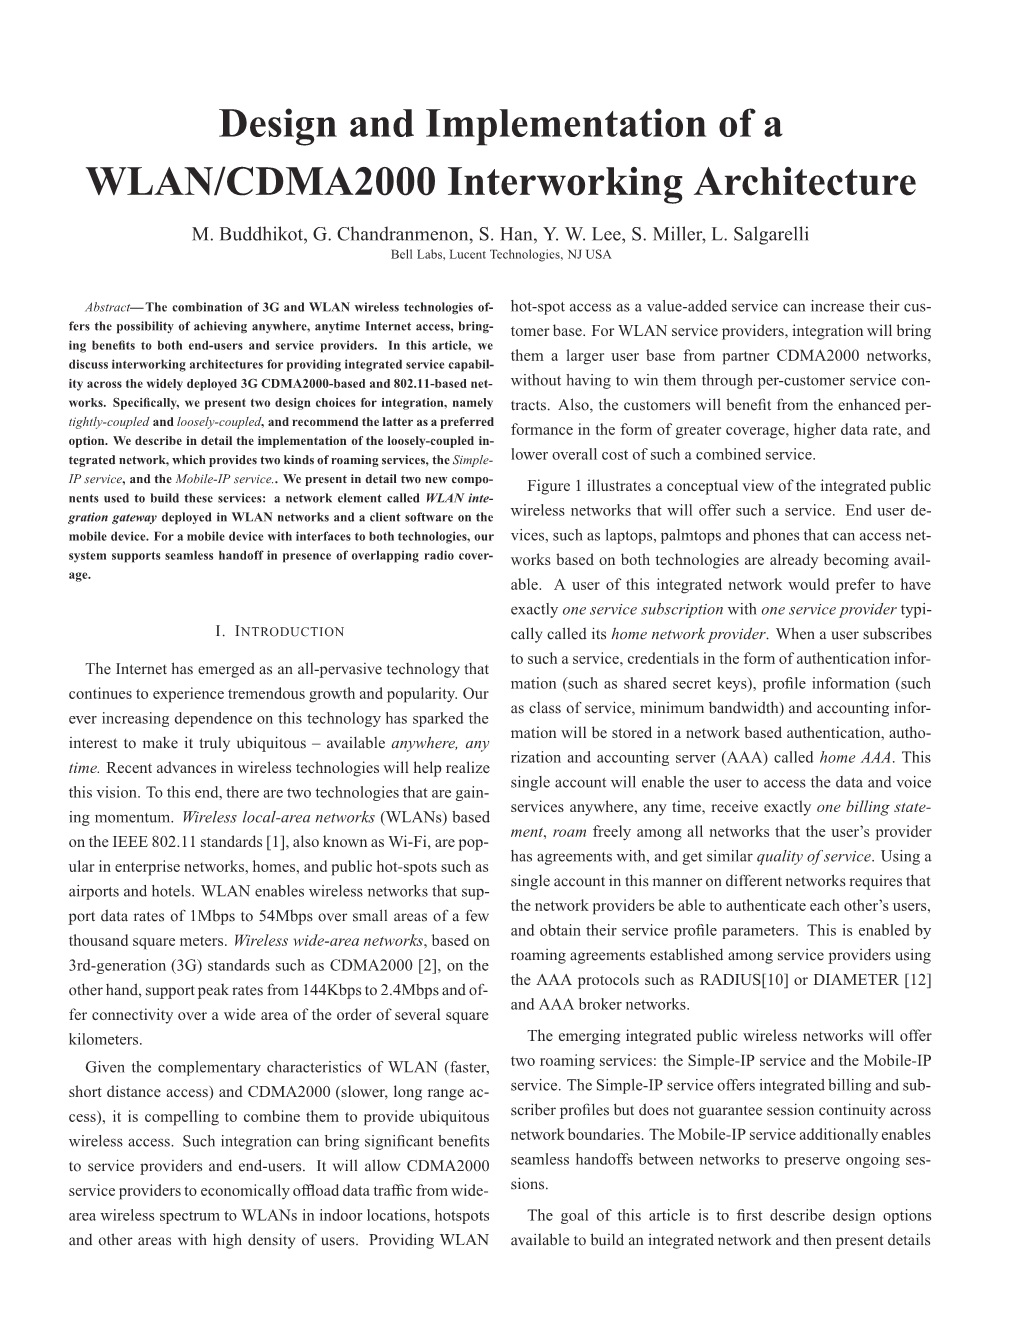 Design and Implementation of a WLAN/CDMA2000 Interworking Architecture